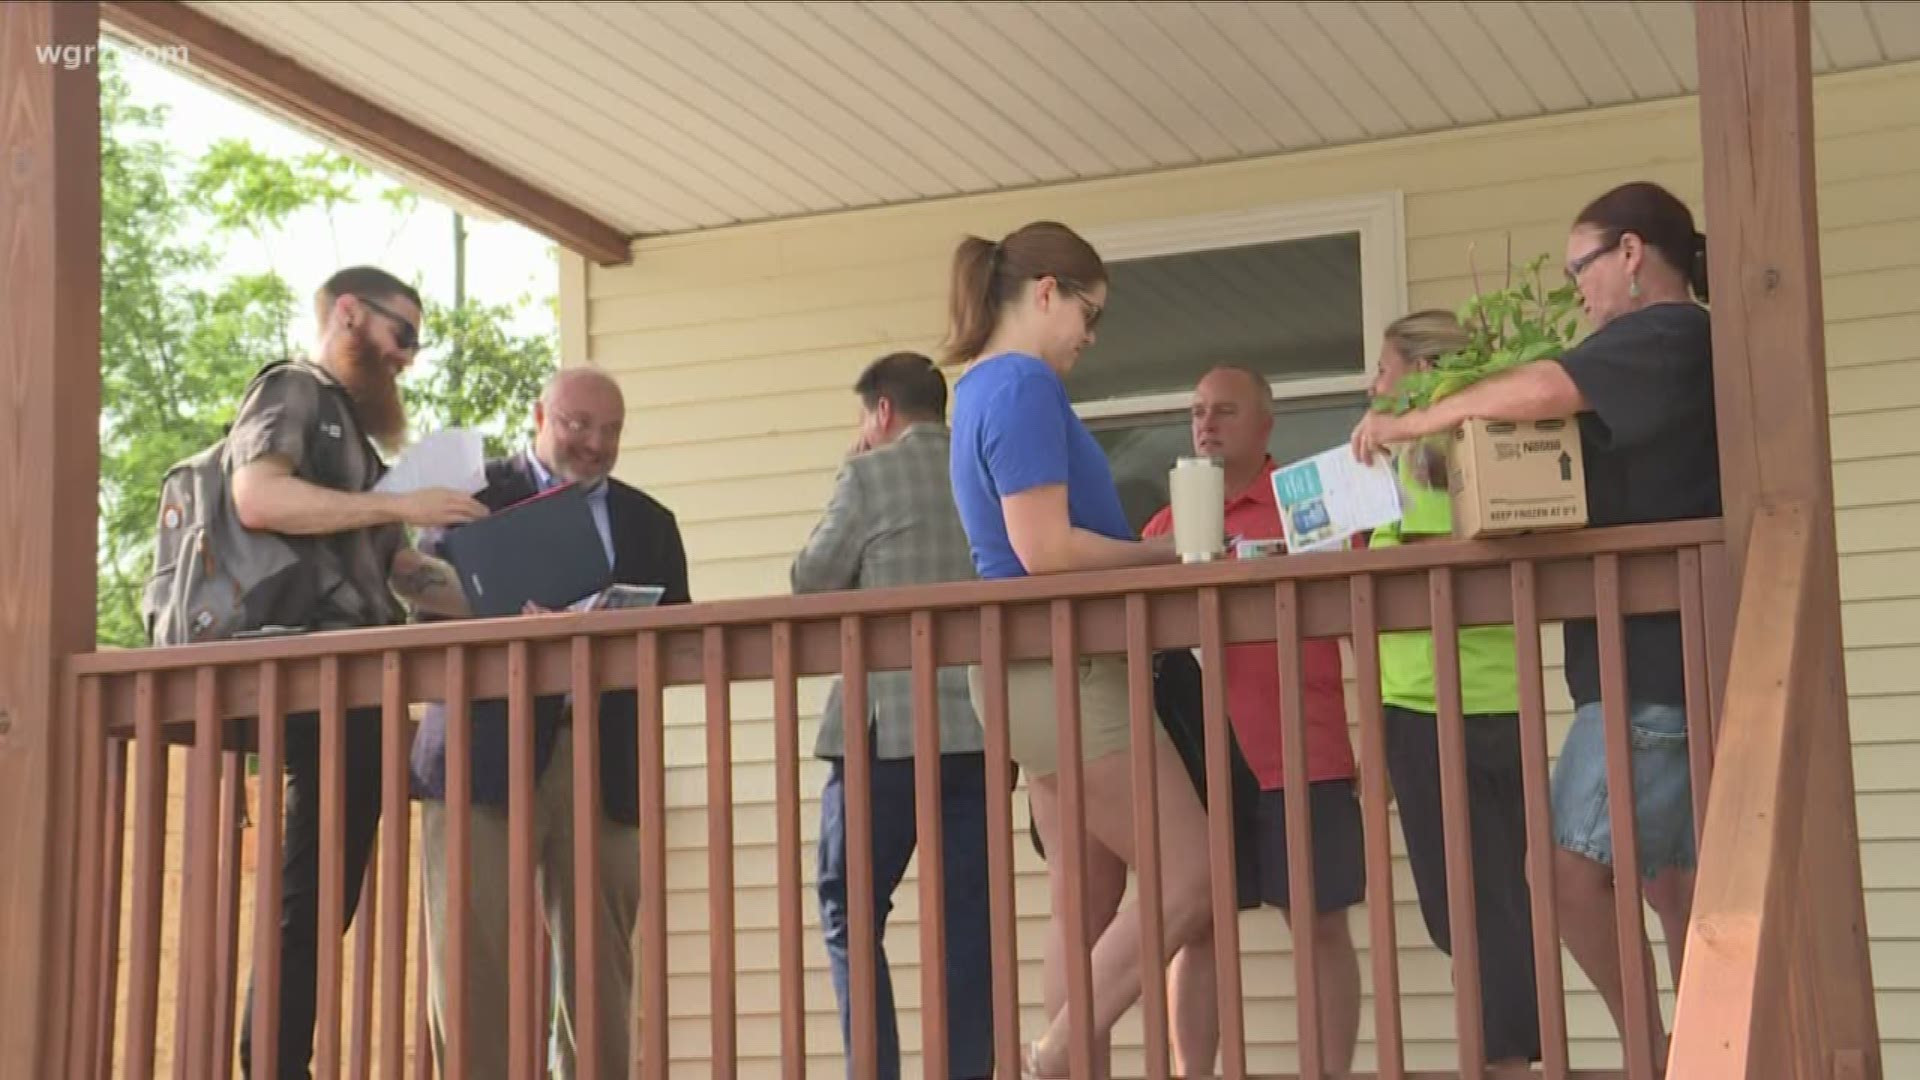 Habitat for Humanity showed off a home they finished in the Maten-Cold Spring area today.